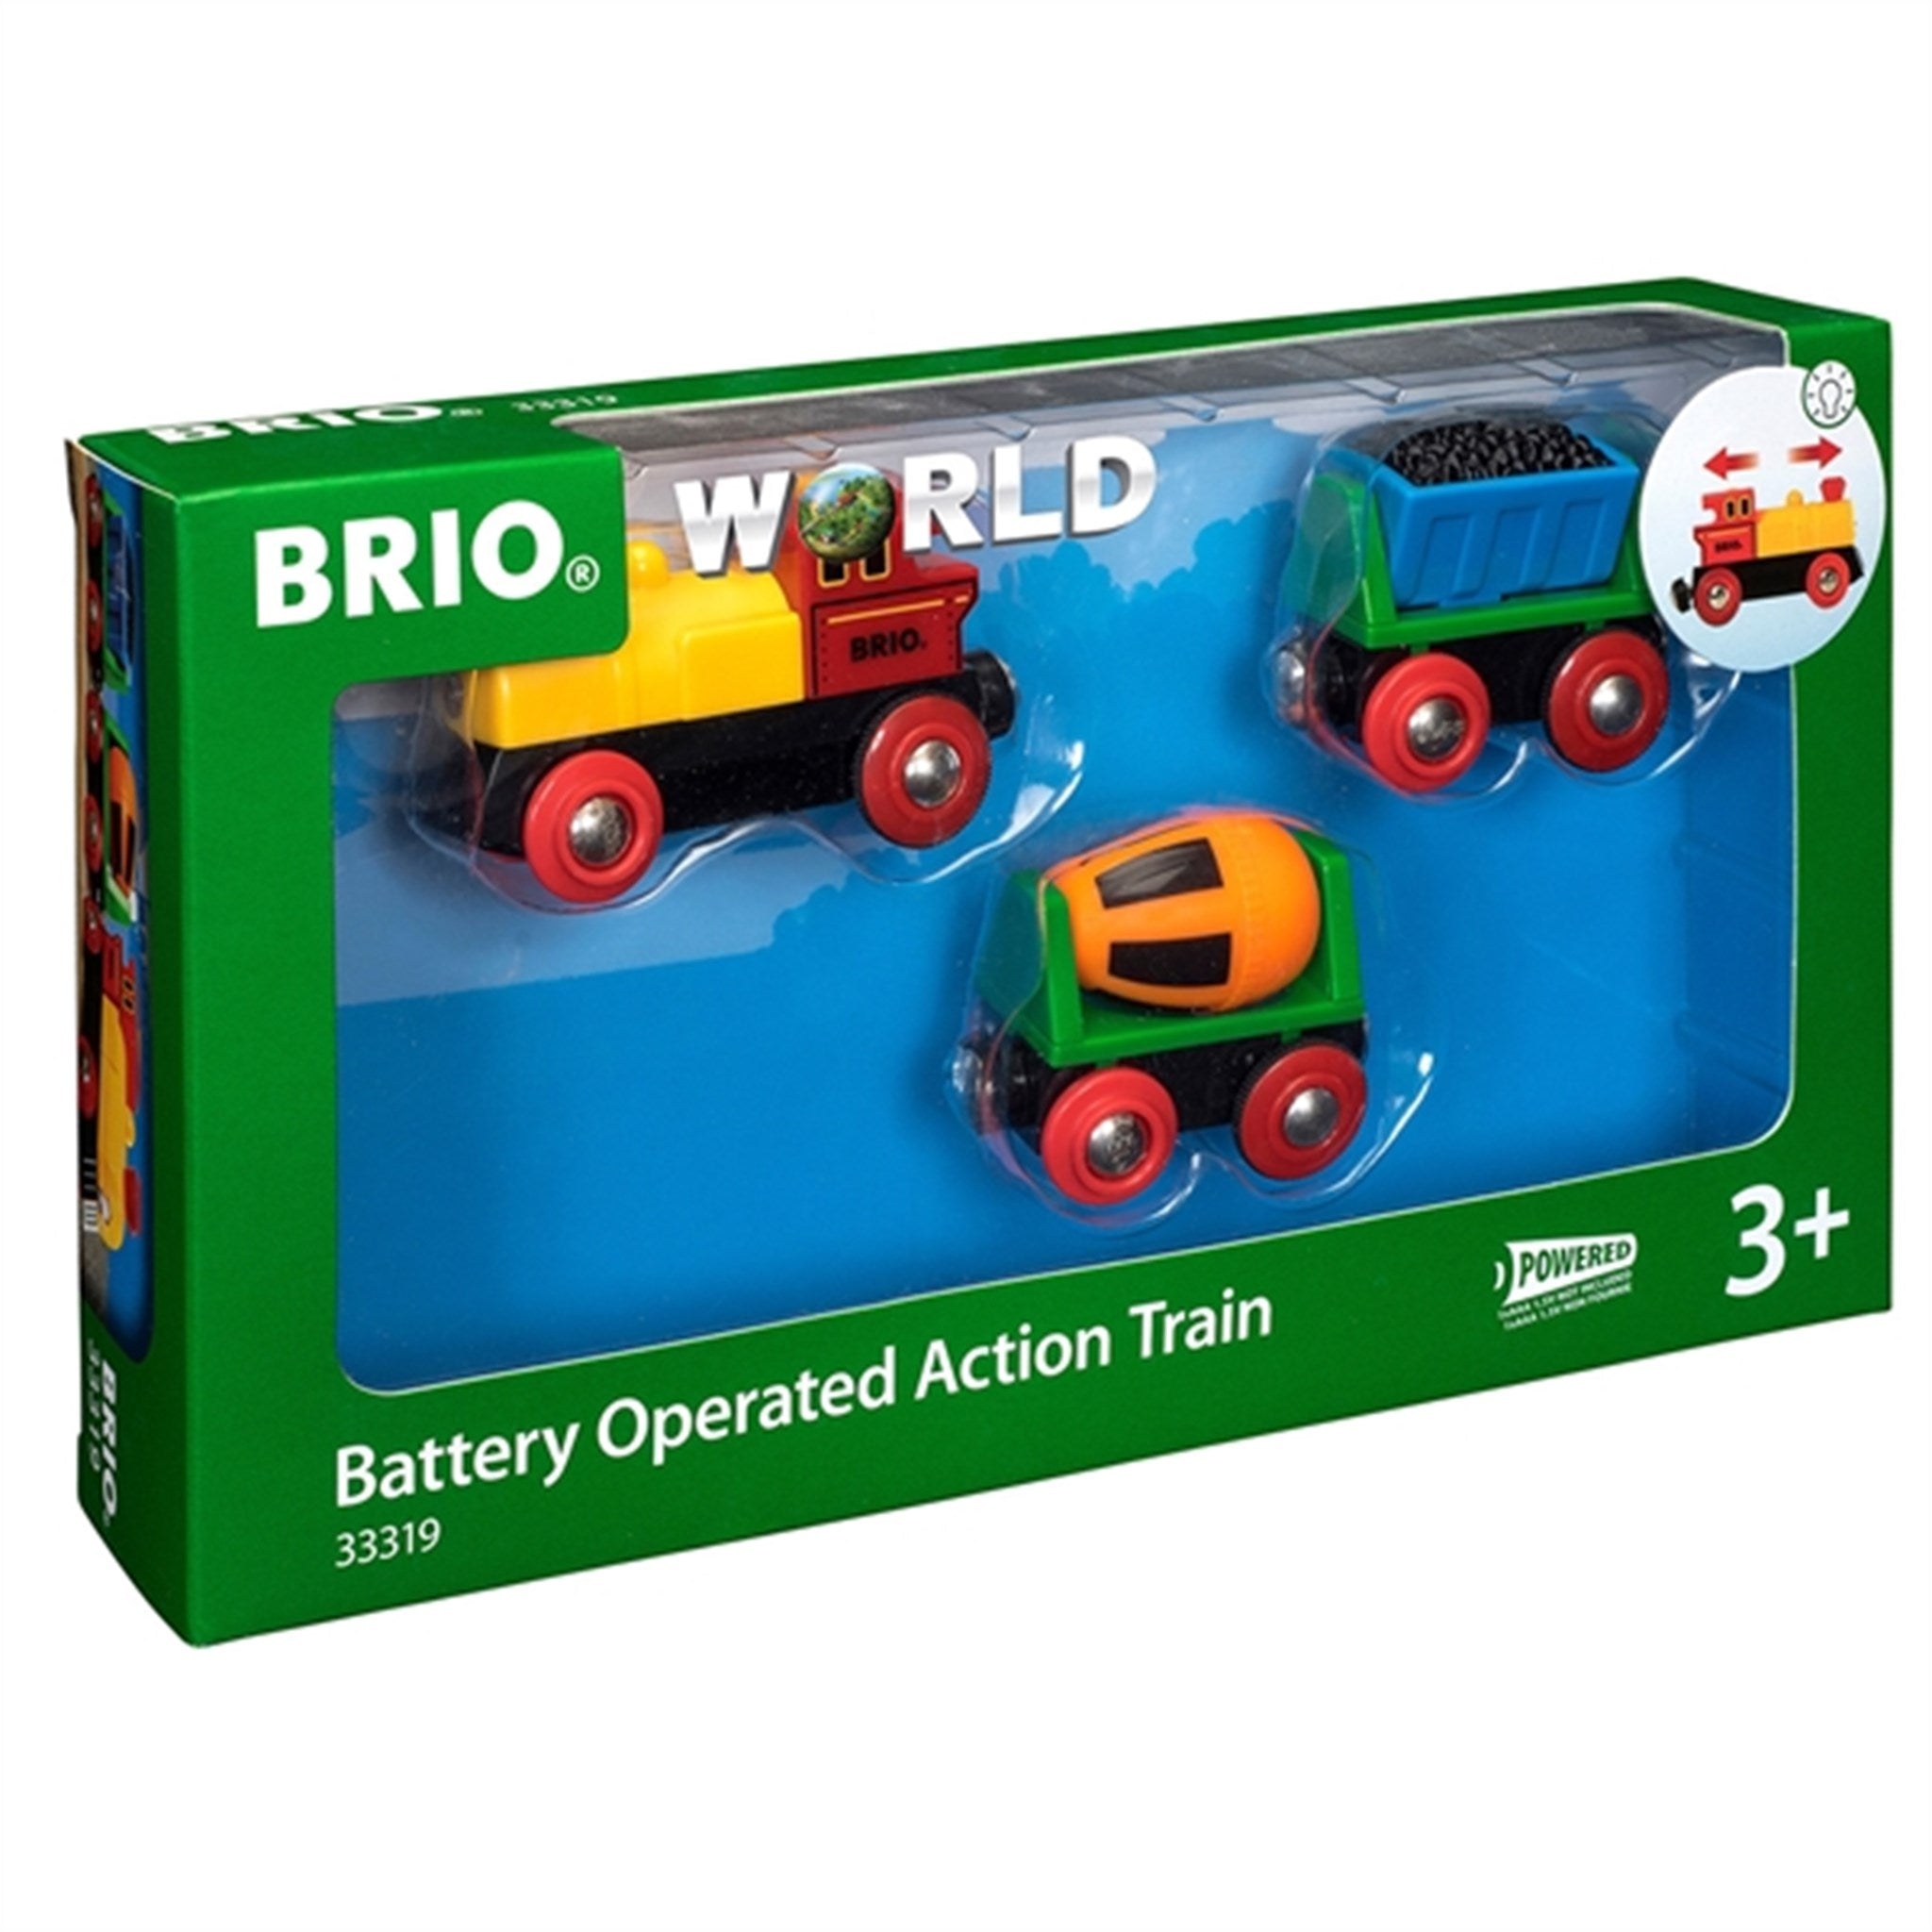 BRIO® Battery Operated Action Train 2